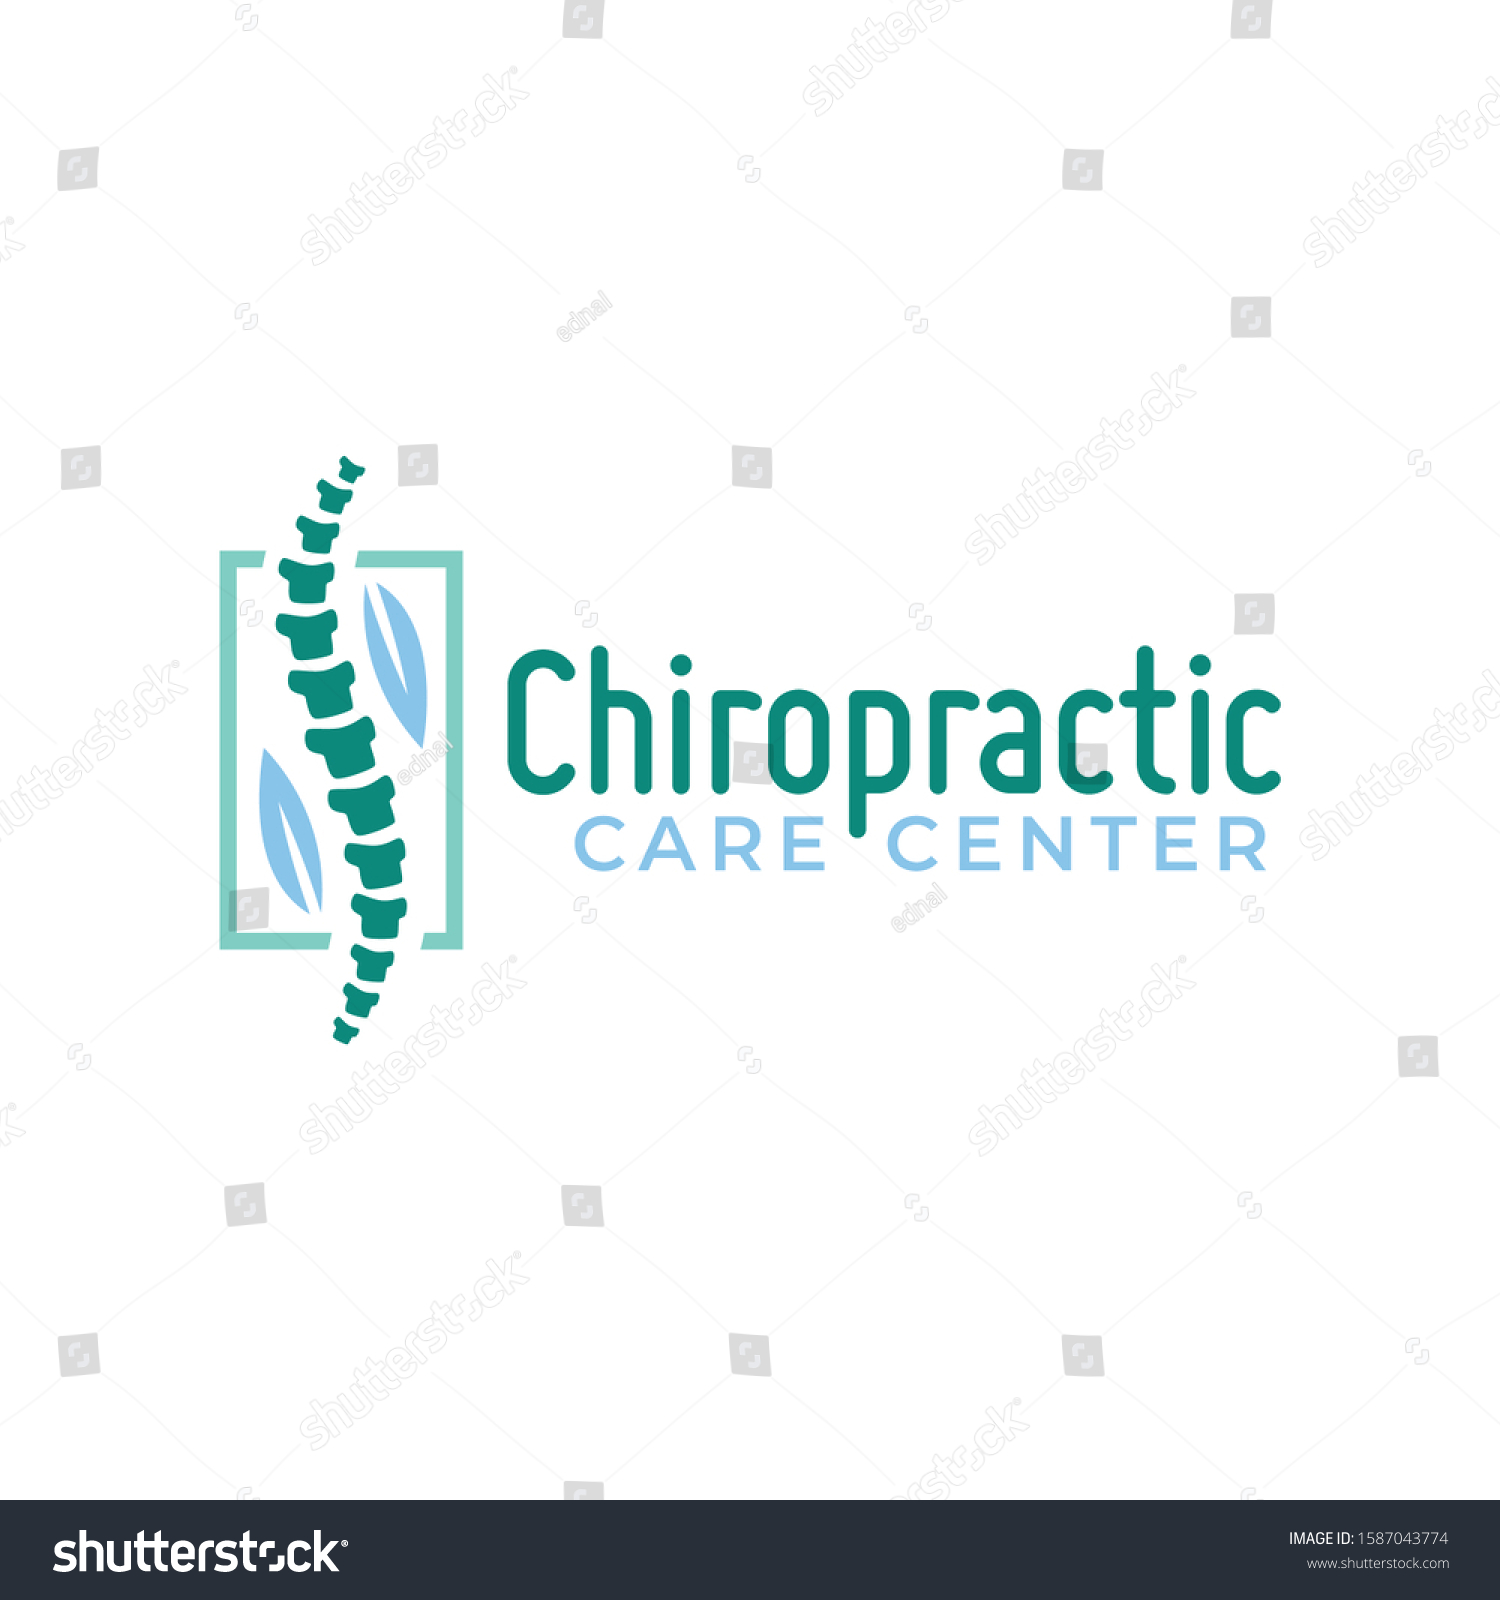 Chiropractic Logo Vector Spine Health Care Stock Vector Royalty Free